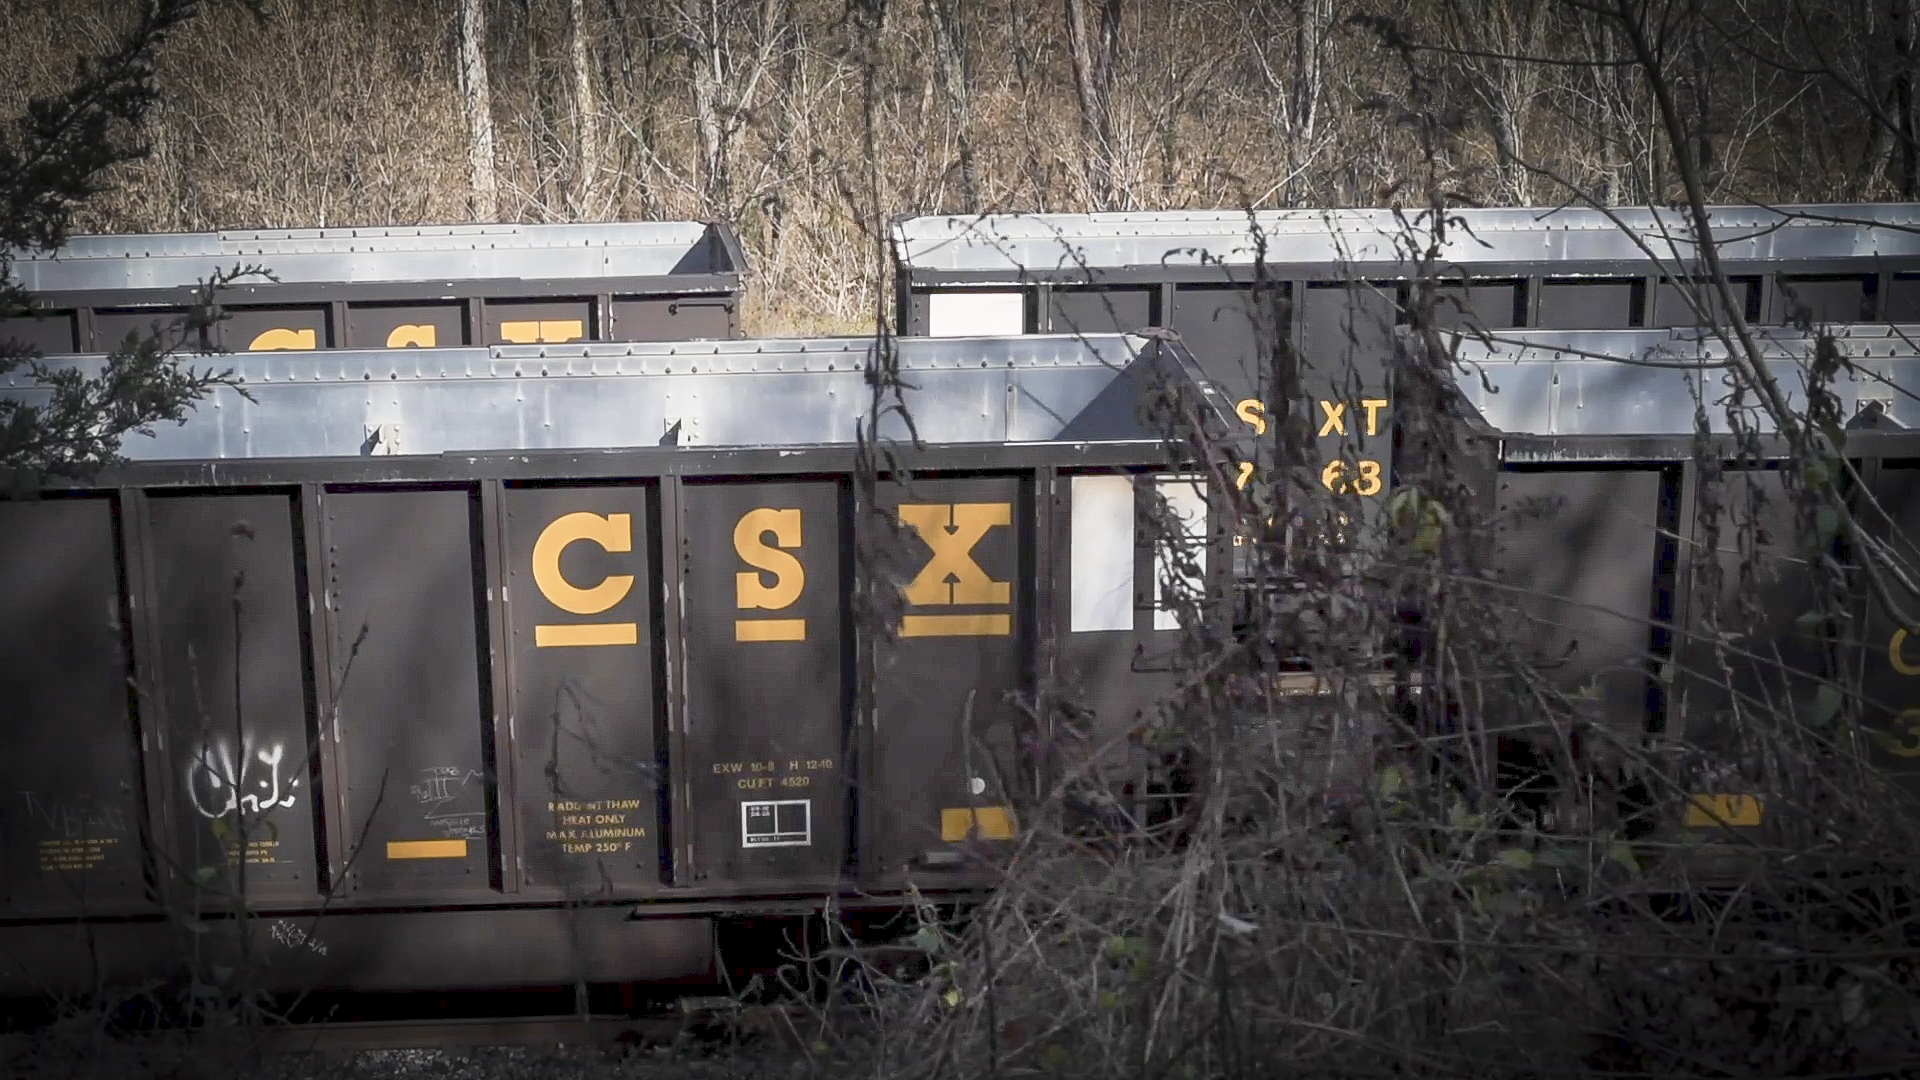 Coal train cars sit empty as the coal energy industry slowly begins to idle nationwide. The demand for cleaner and renewable energy sources is causing significant job loss in certain parts of the region forcing thousands to leave their hometown looking for new employment.